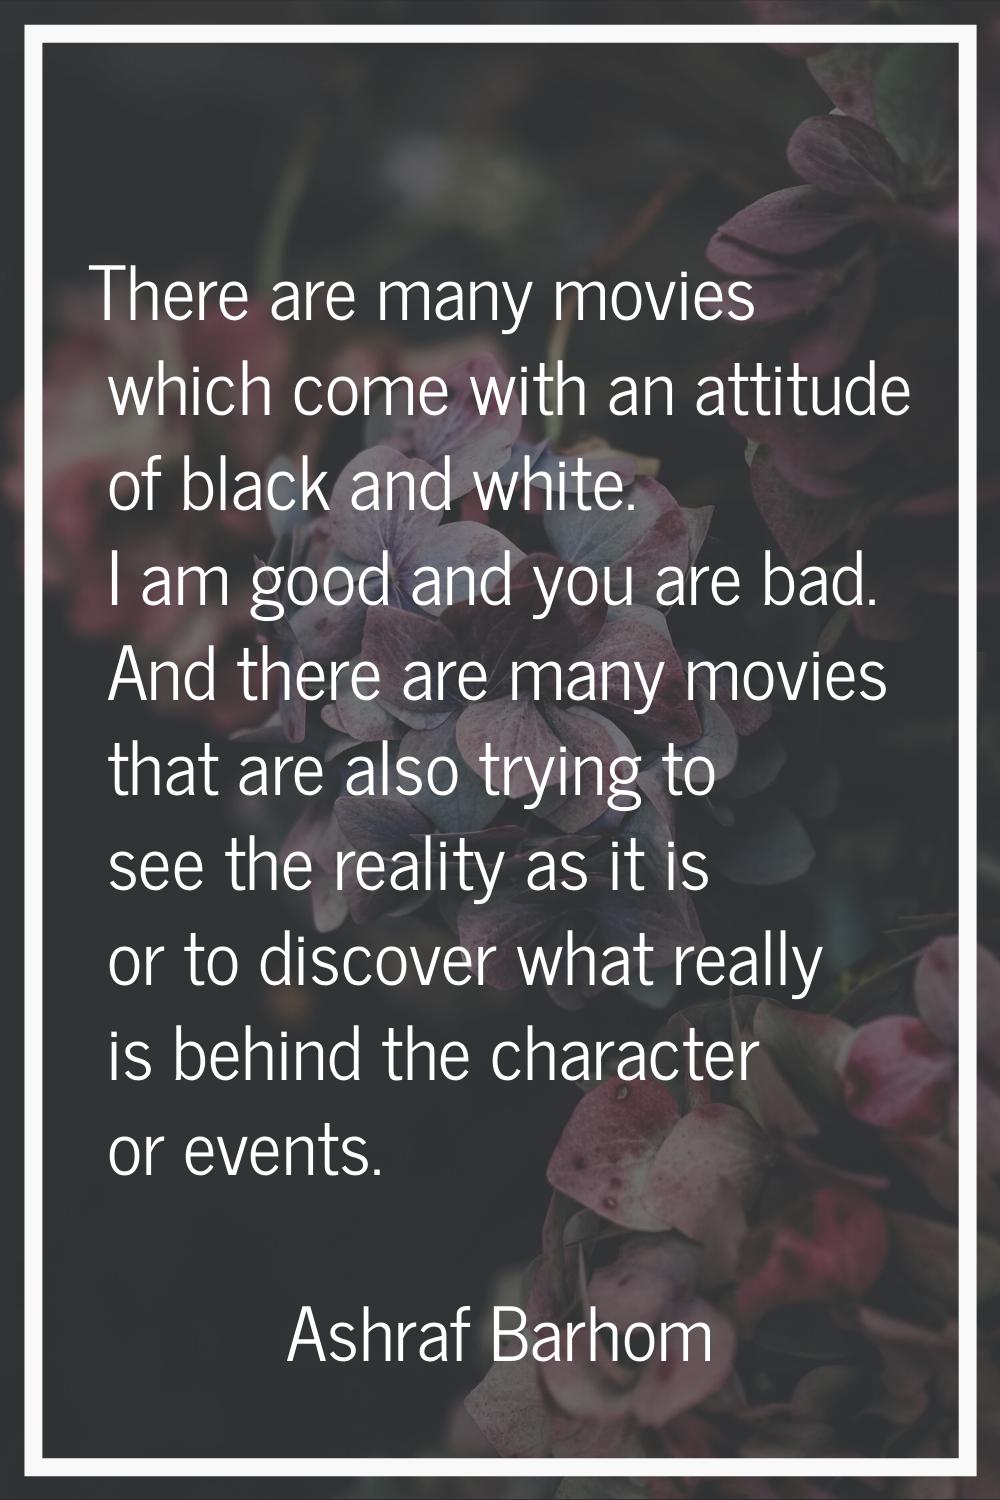 There are many movies which come with an attitude of black and white. I am good and you are bad. An